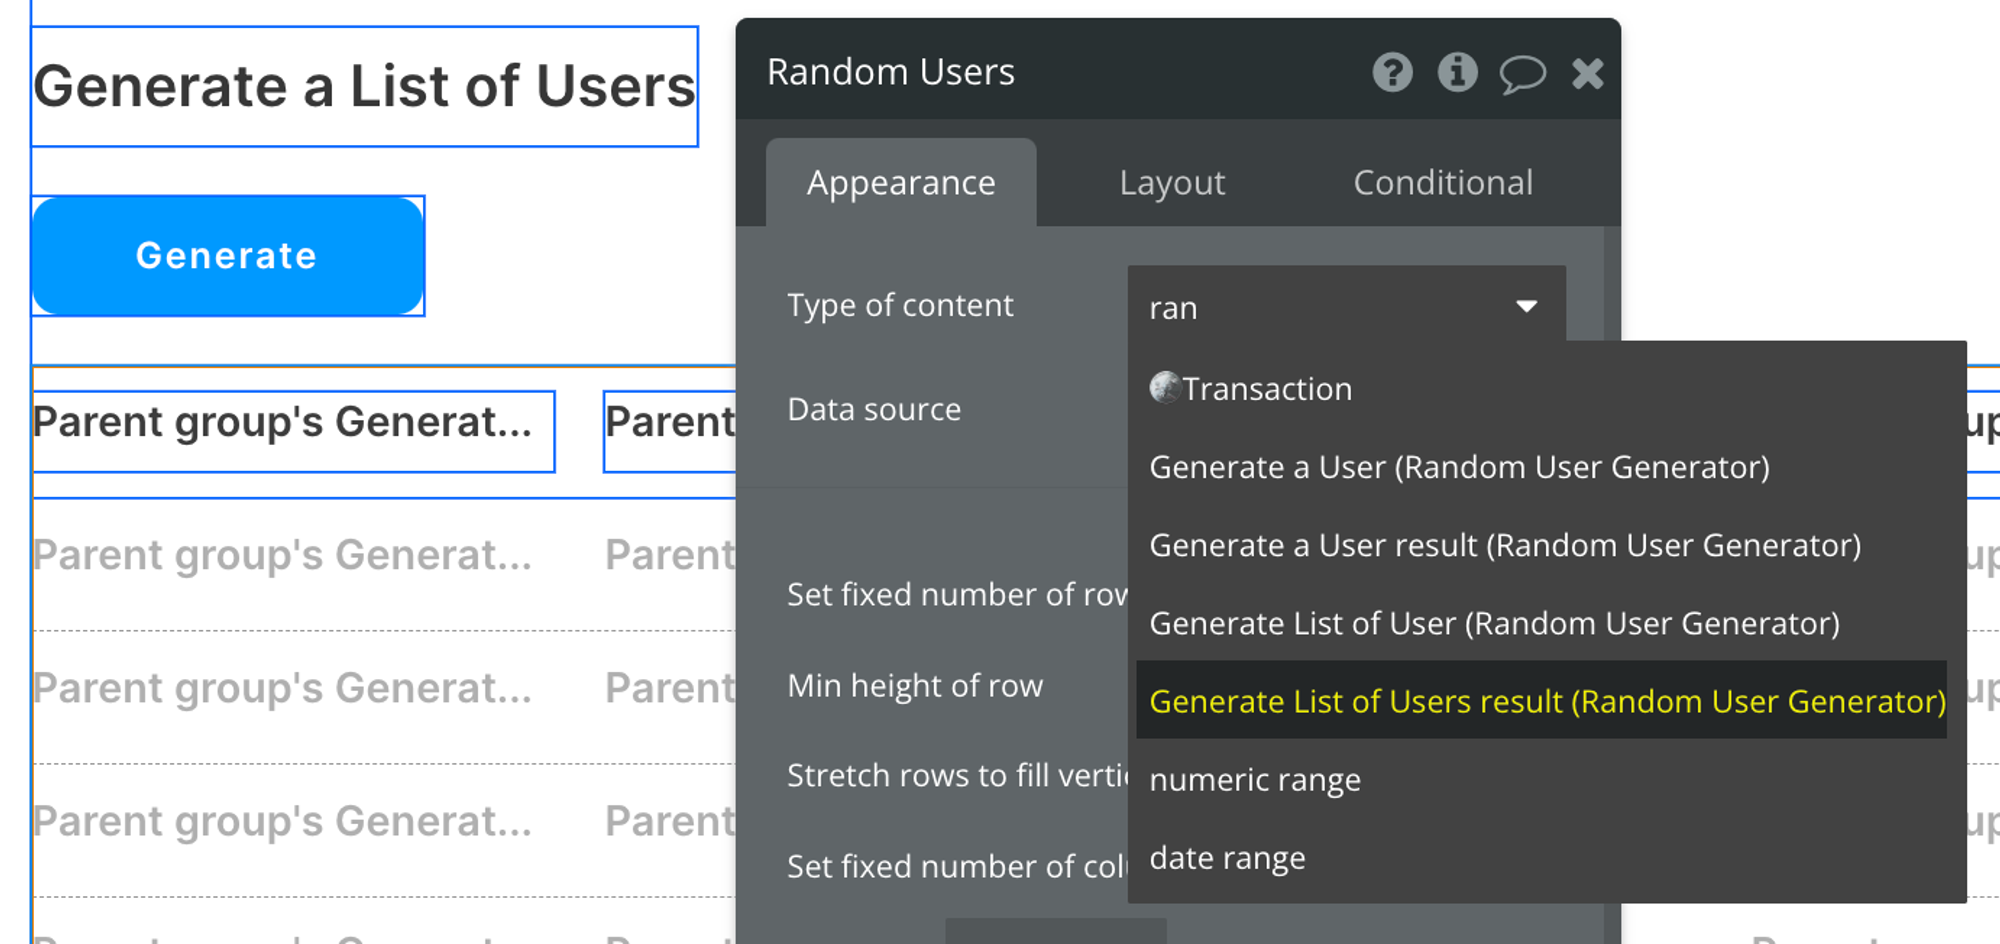 Select Generate List of Users result (Random User Generator) as the type of content for this repeating group